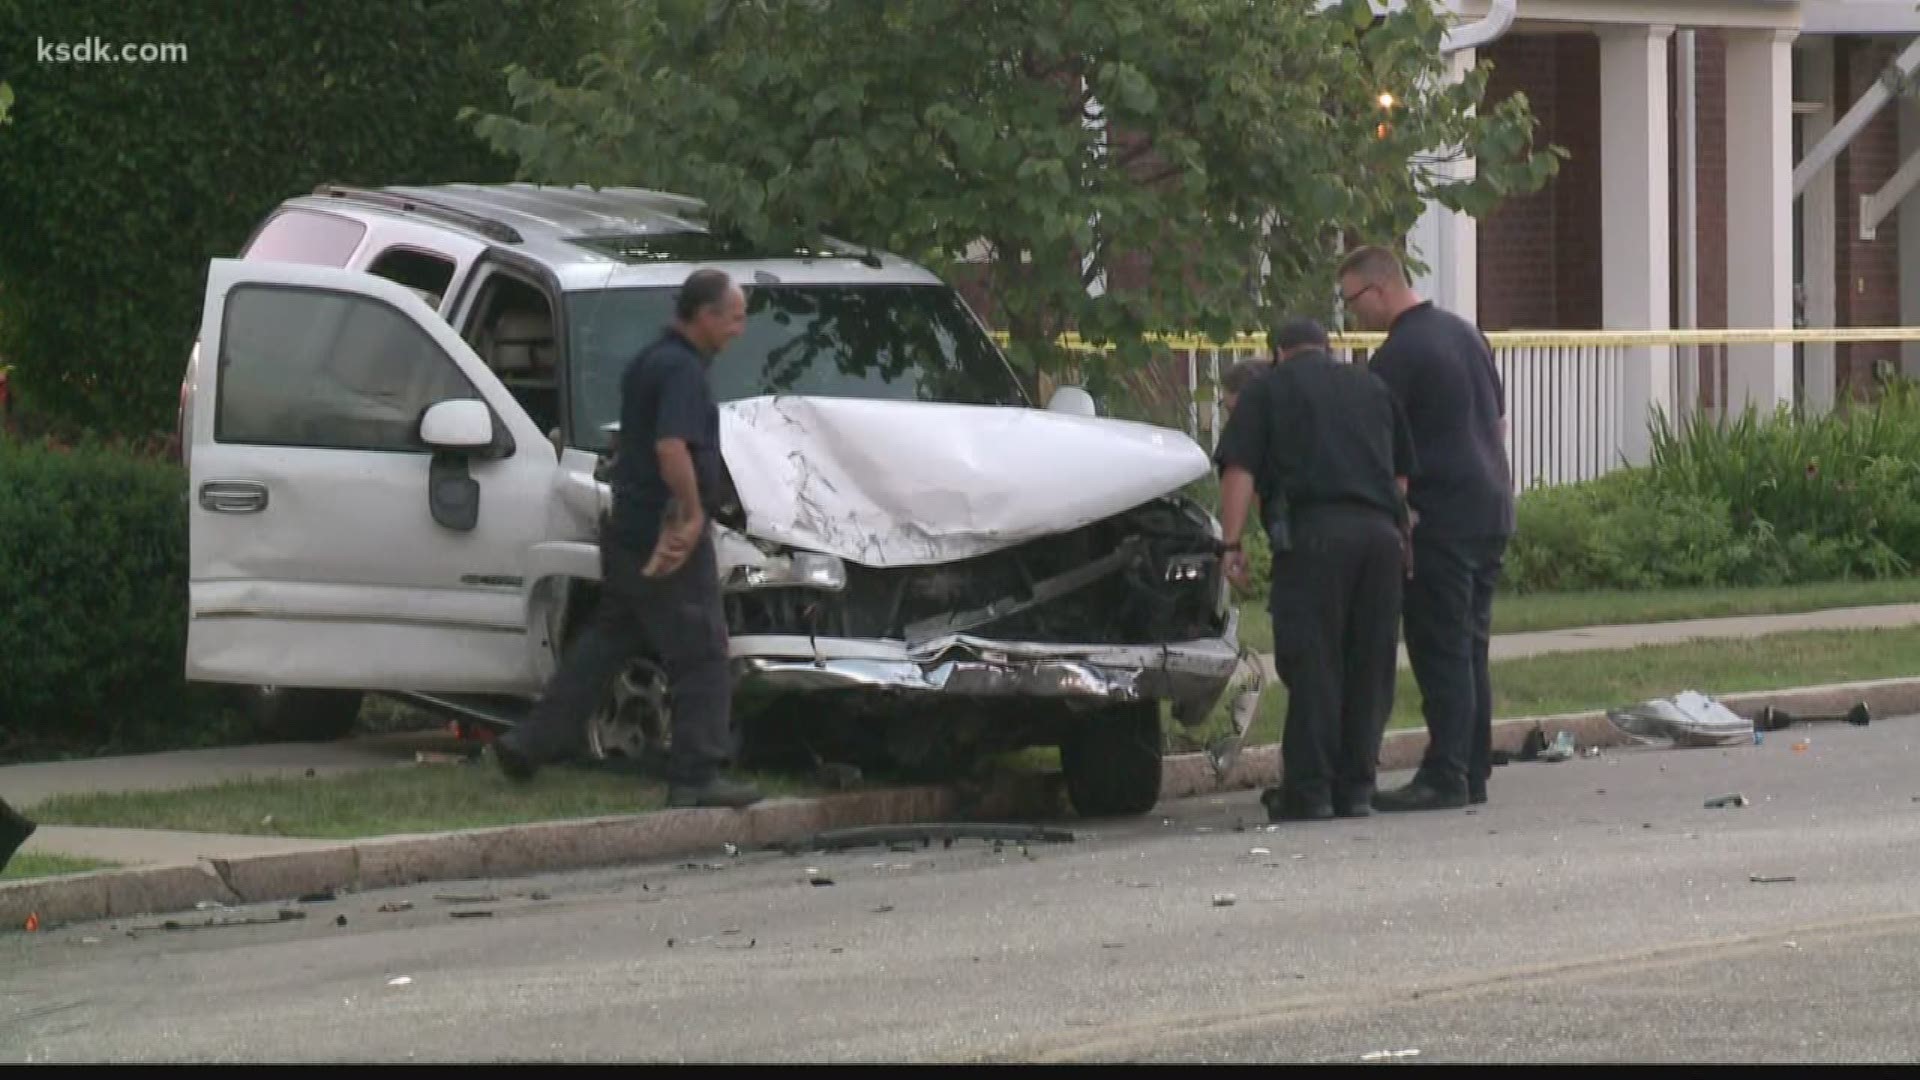 The woman was in a car when the stolen car hit it. The woman was declared dead on the scene.